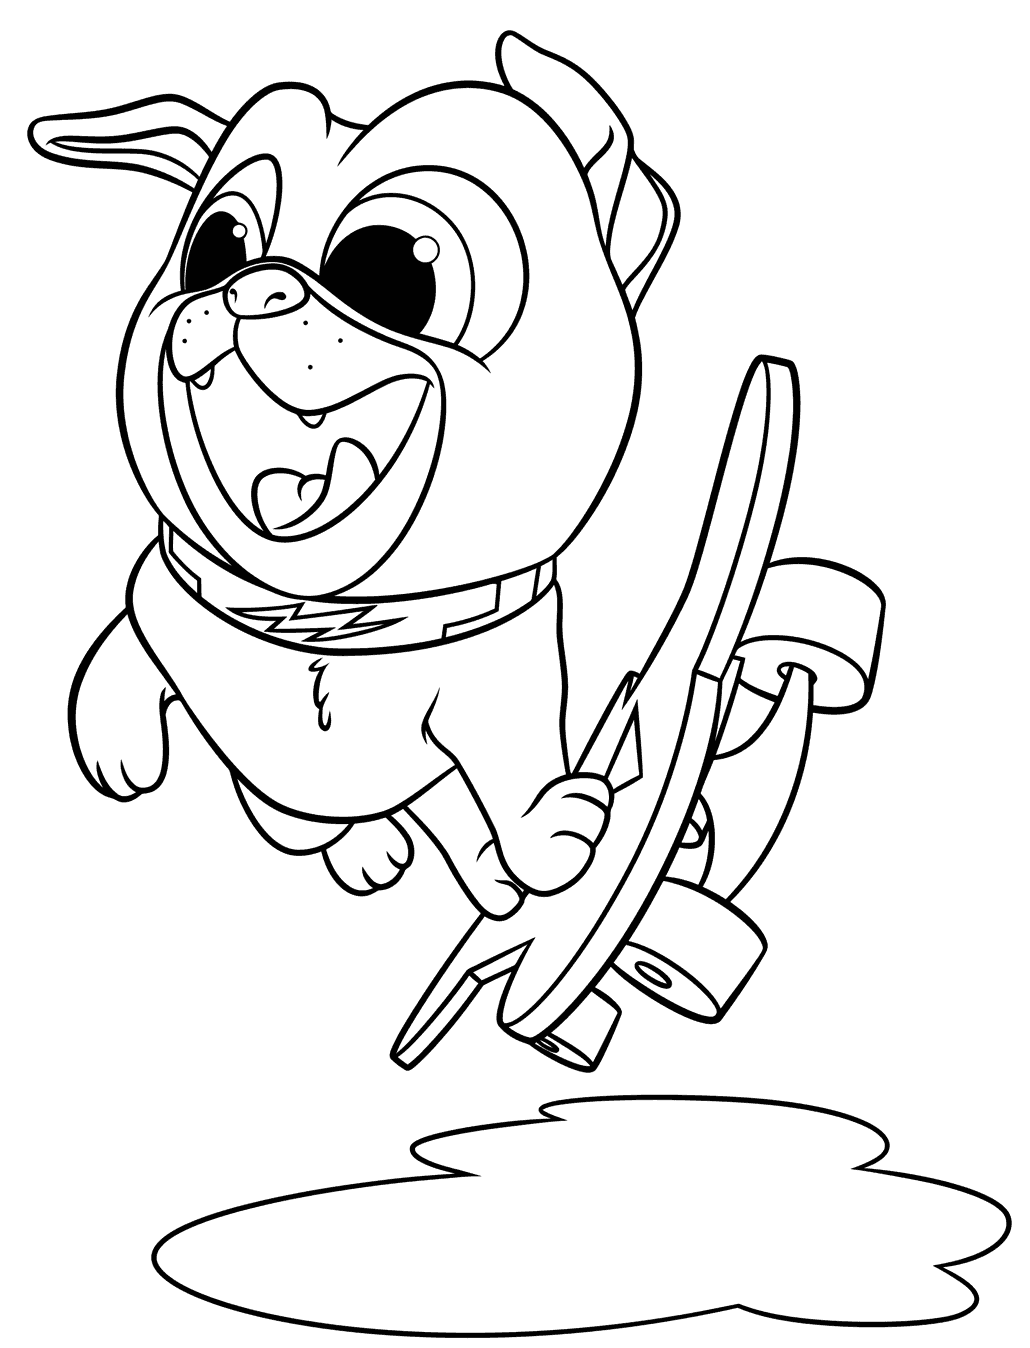 Puppy Dog Pals Skateboard Coloring Pages